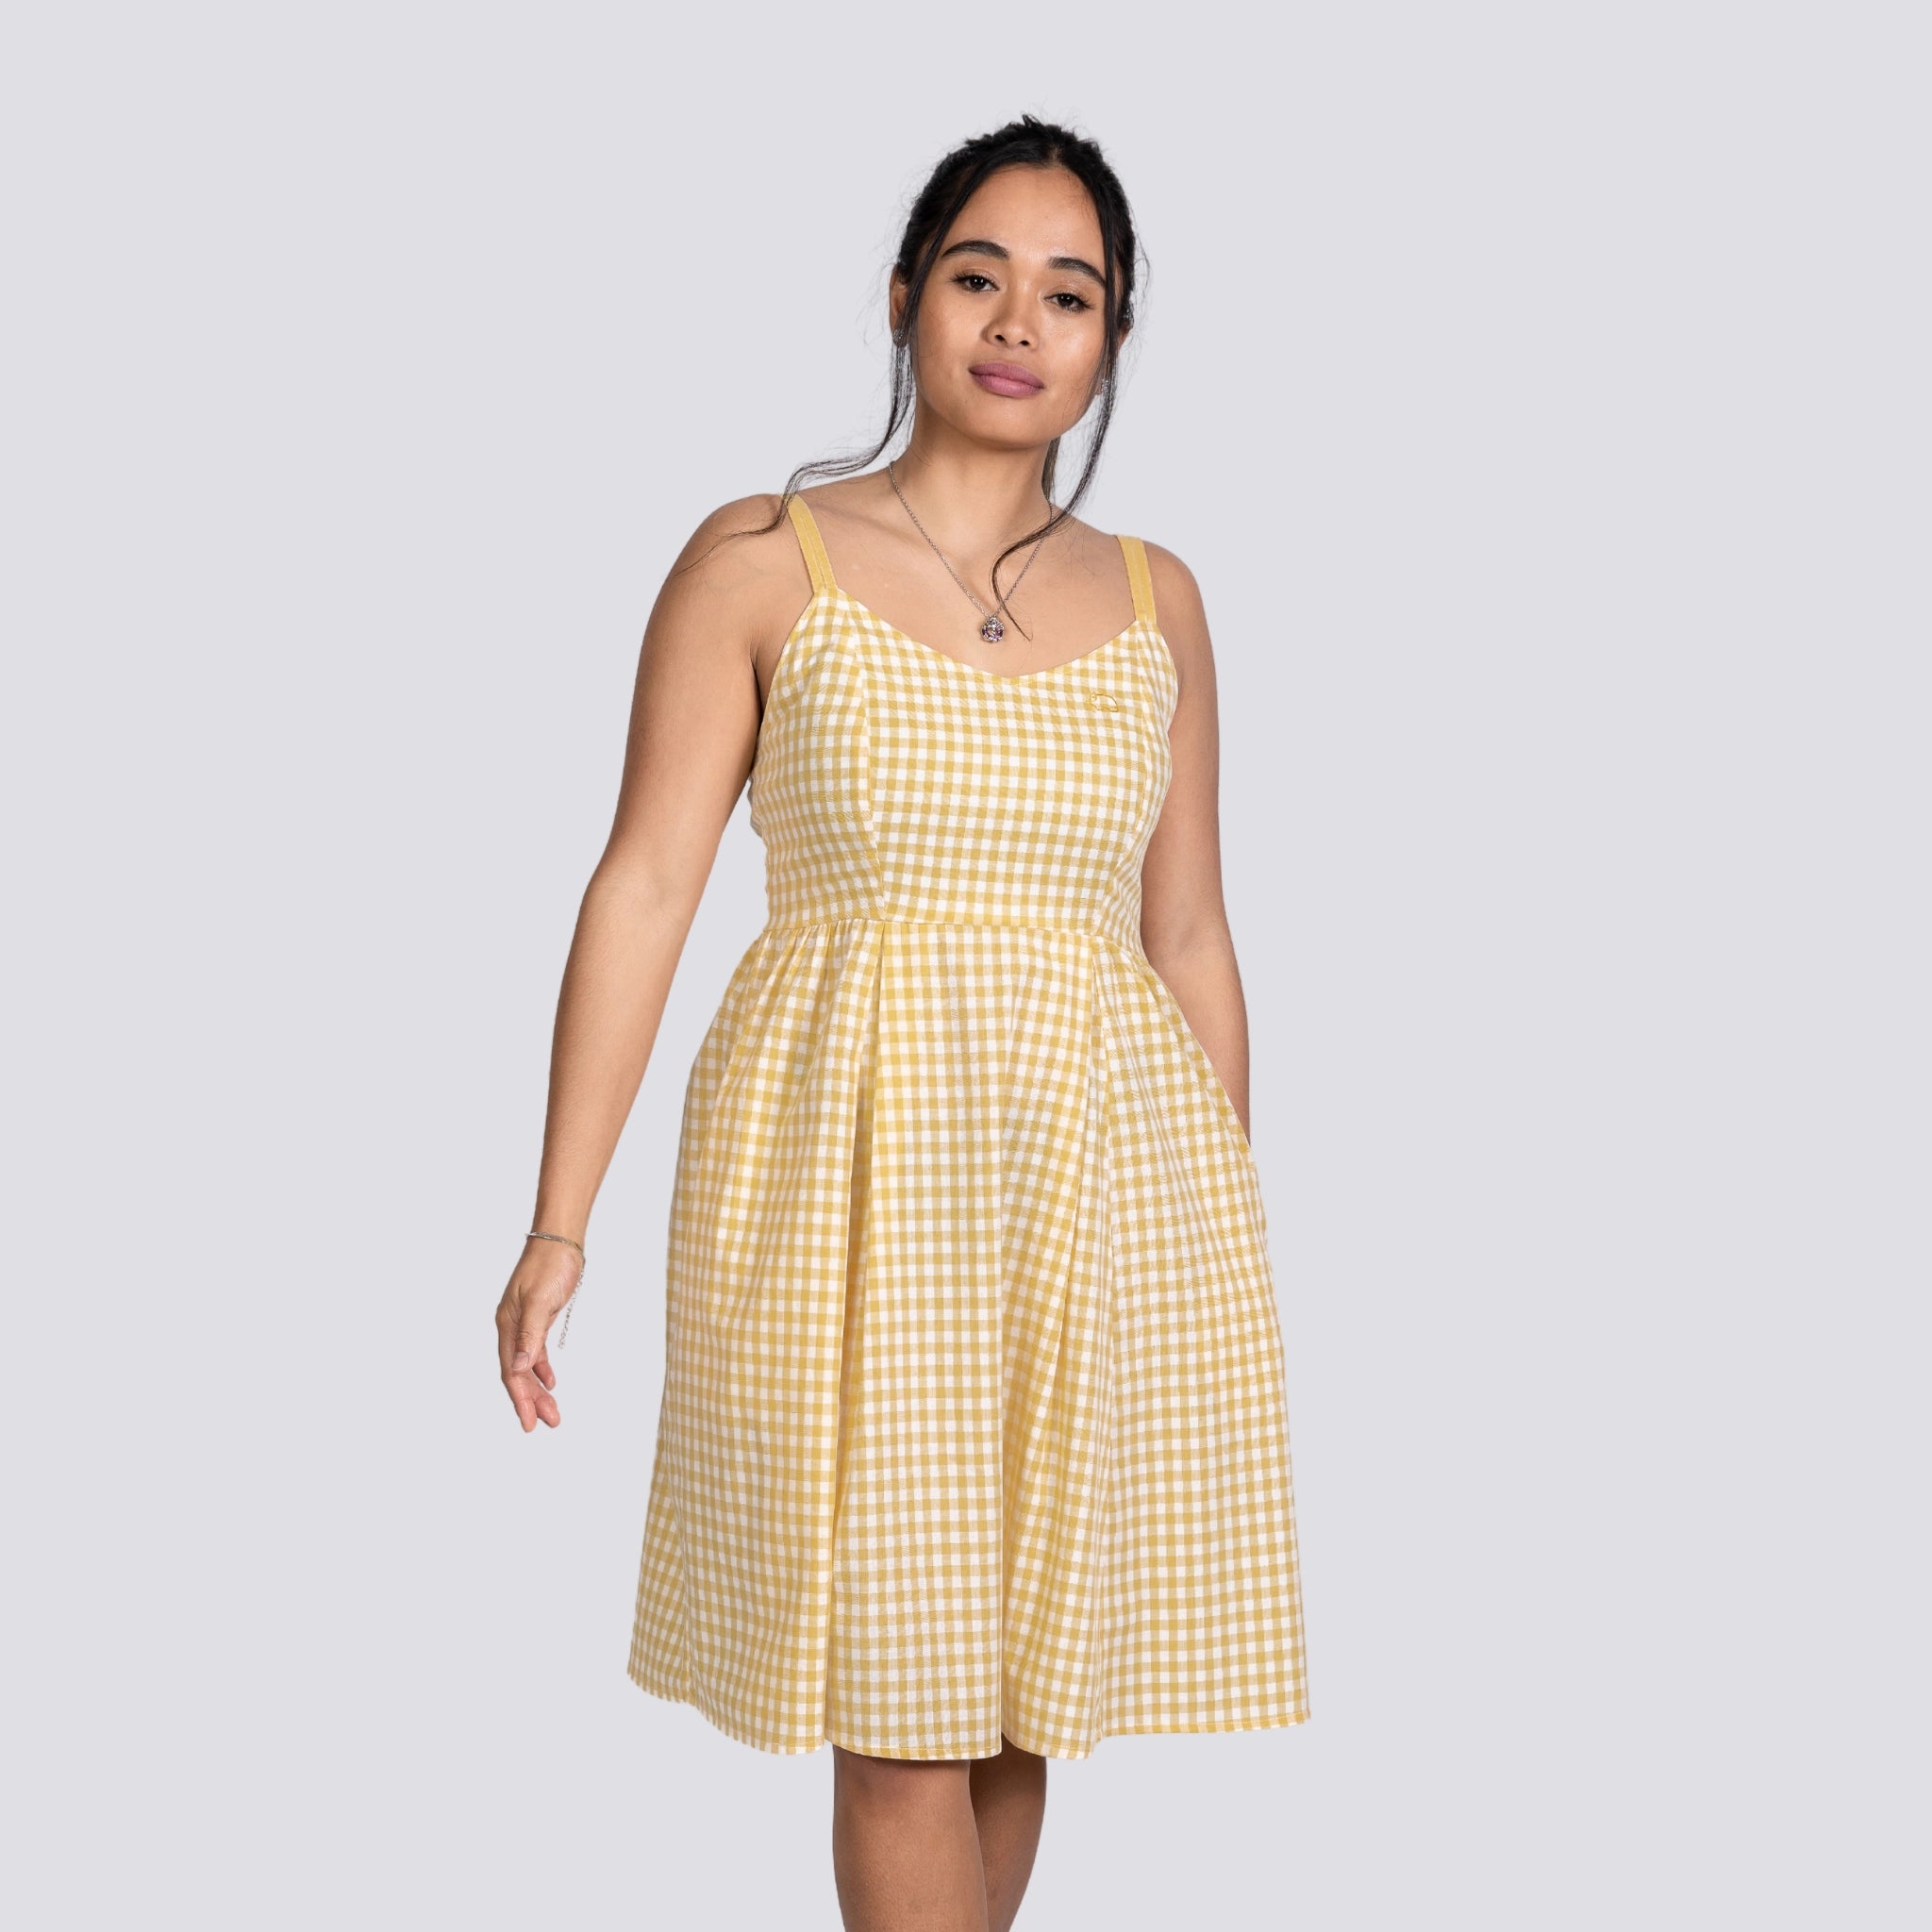 A young woman stands wearing a Karee Sunshine Chic Yellow Plaid Cotton Mini Dress, looking directly at the camera with a neutral expression.